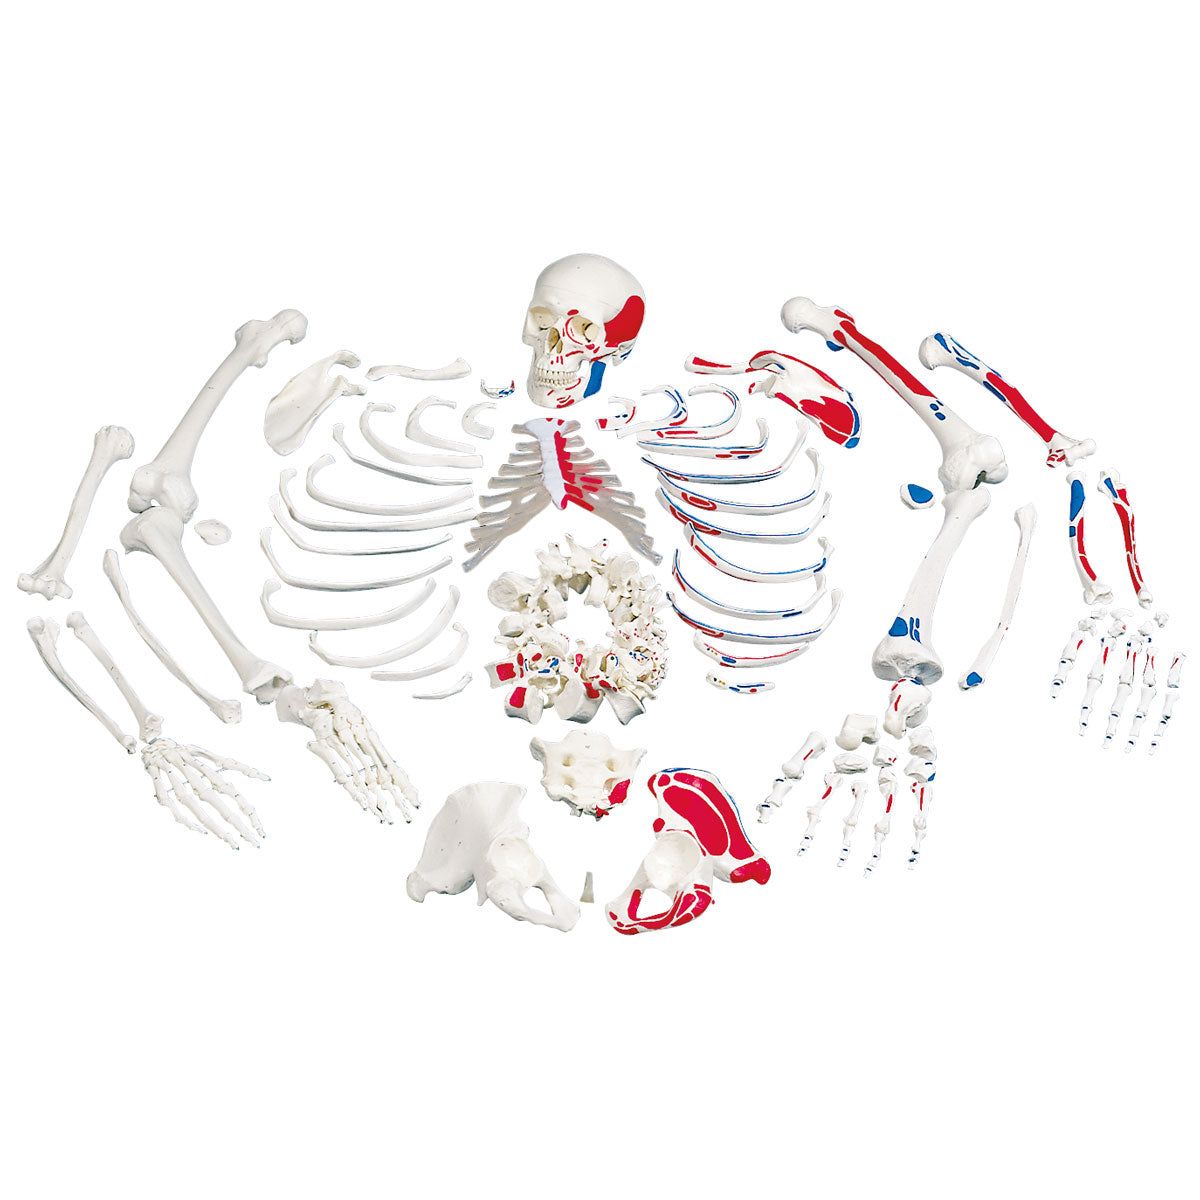 A05/2 Disarticulated Full Human Skeleton, Painted Muscles, with 3 Part Skull